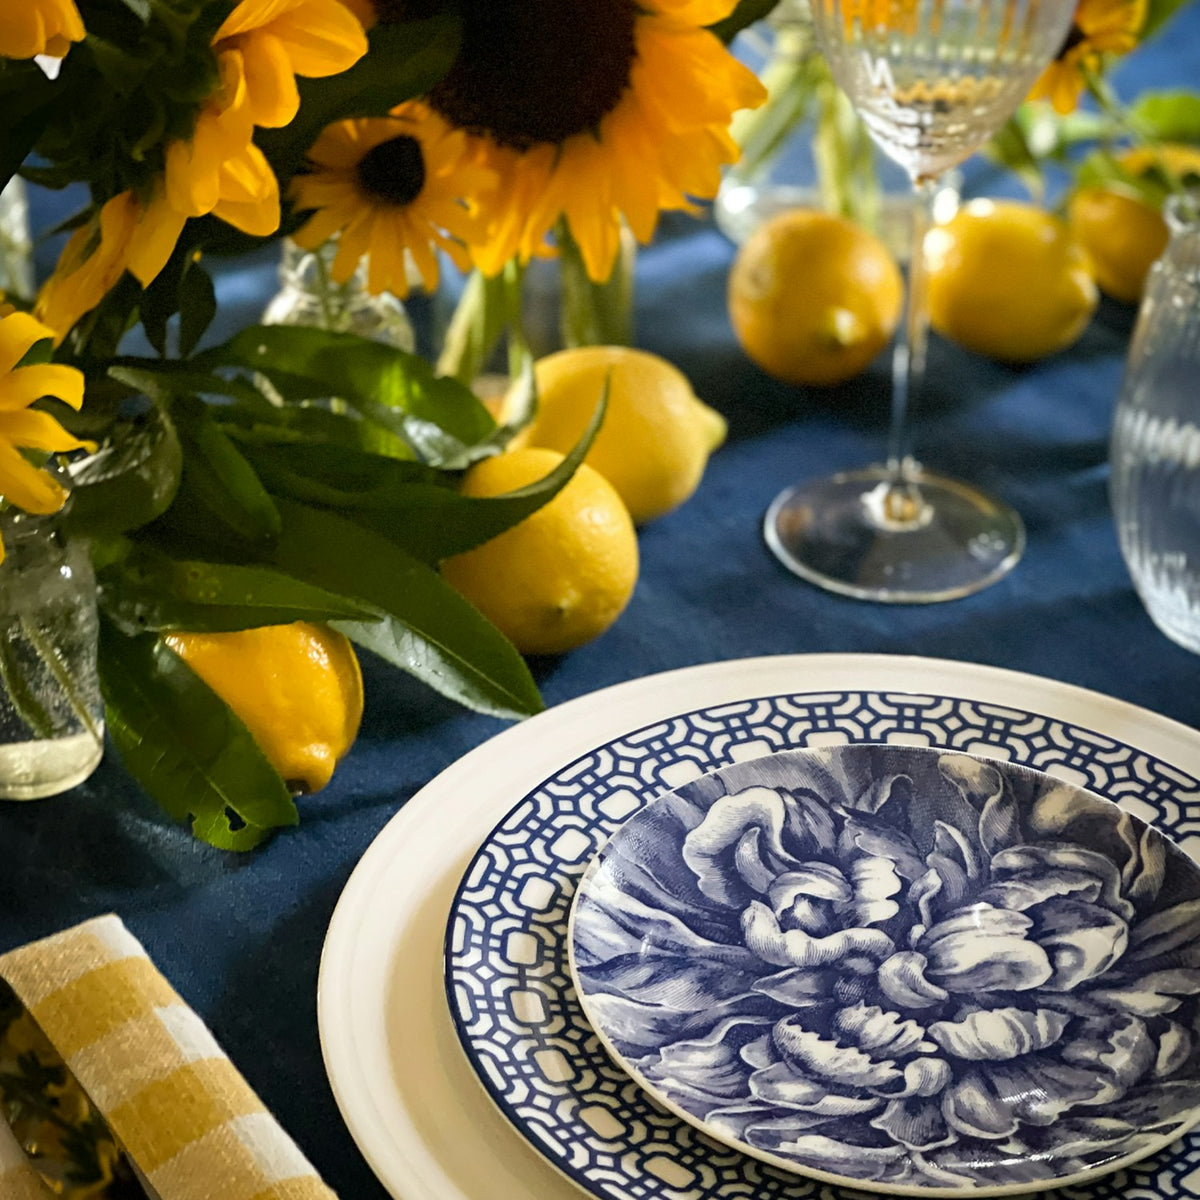 A table setting with heirloom-quality blue and white Peony Small Plates by Caskata Artisanal Home featuring floral-patterned plates, a yellow striped napkin, lemons, and a bouquet of yellow flowers in the background.